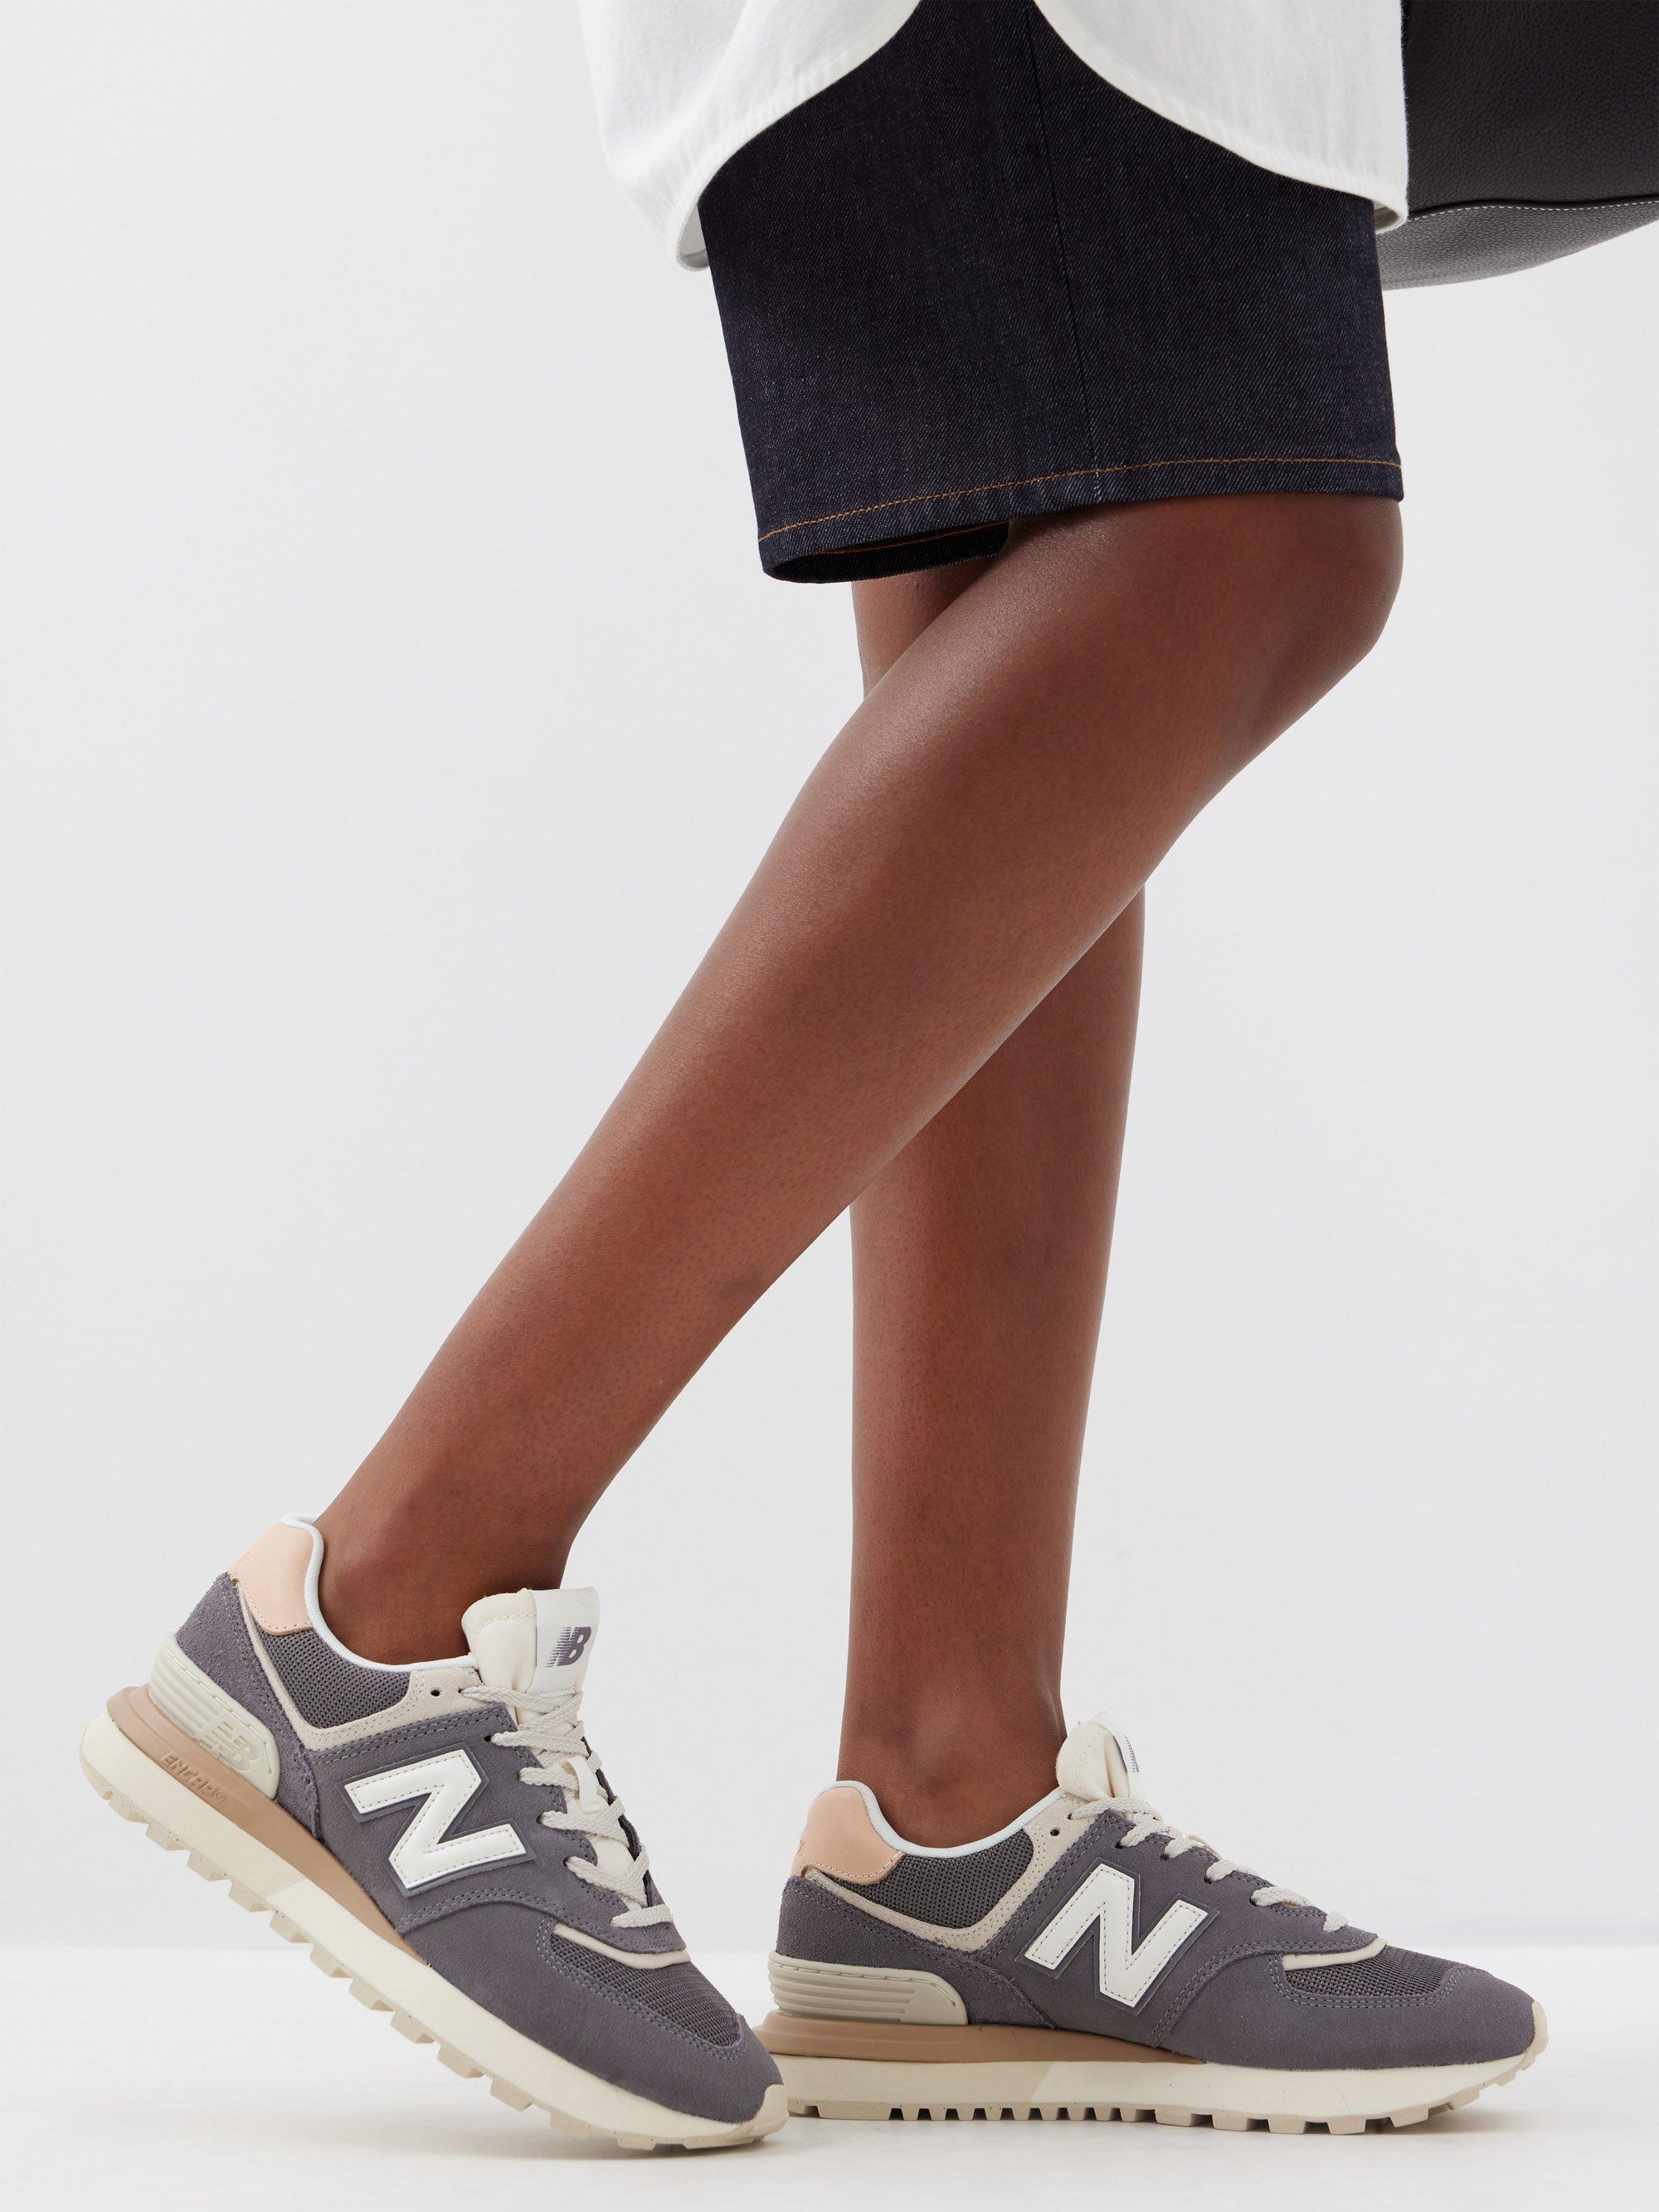 New Balance 574 Suede, Leather And Mesh Trainers in White | Lyst